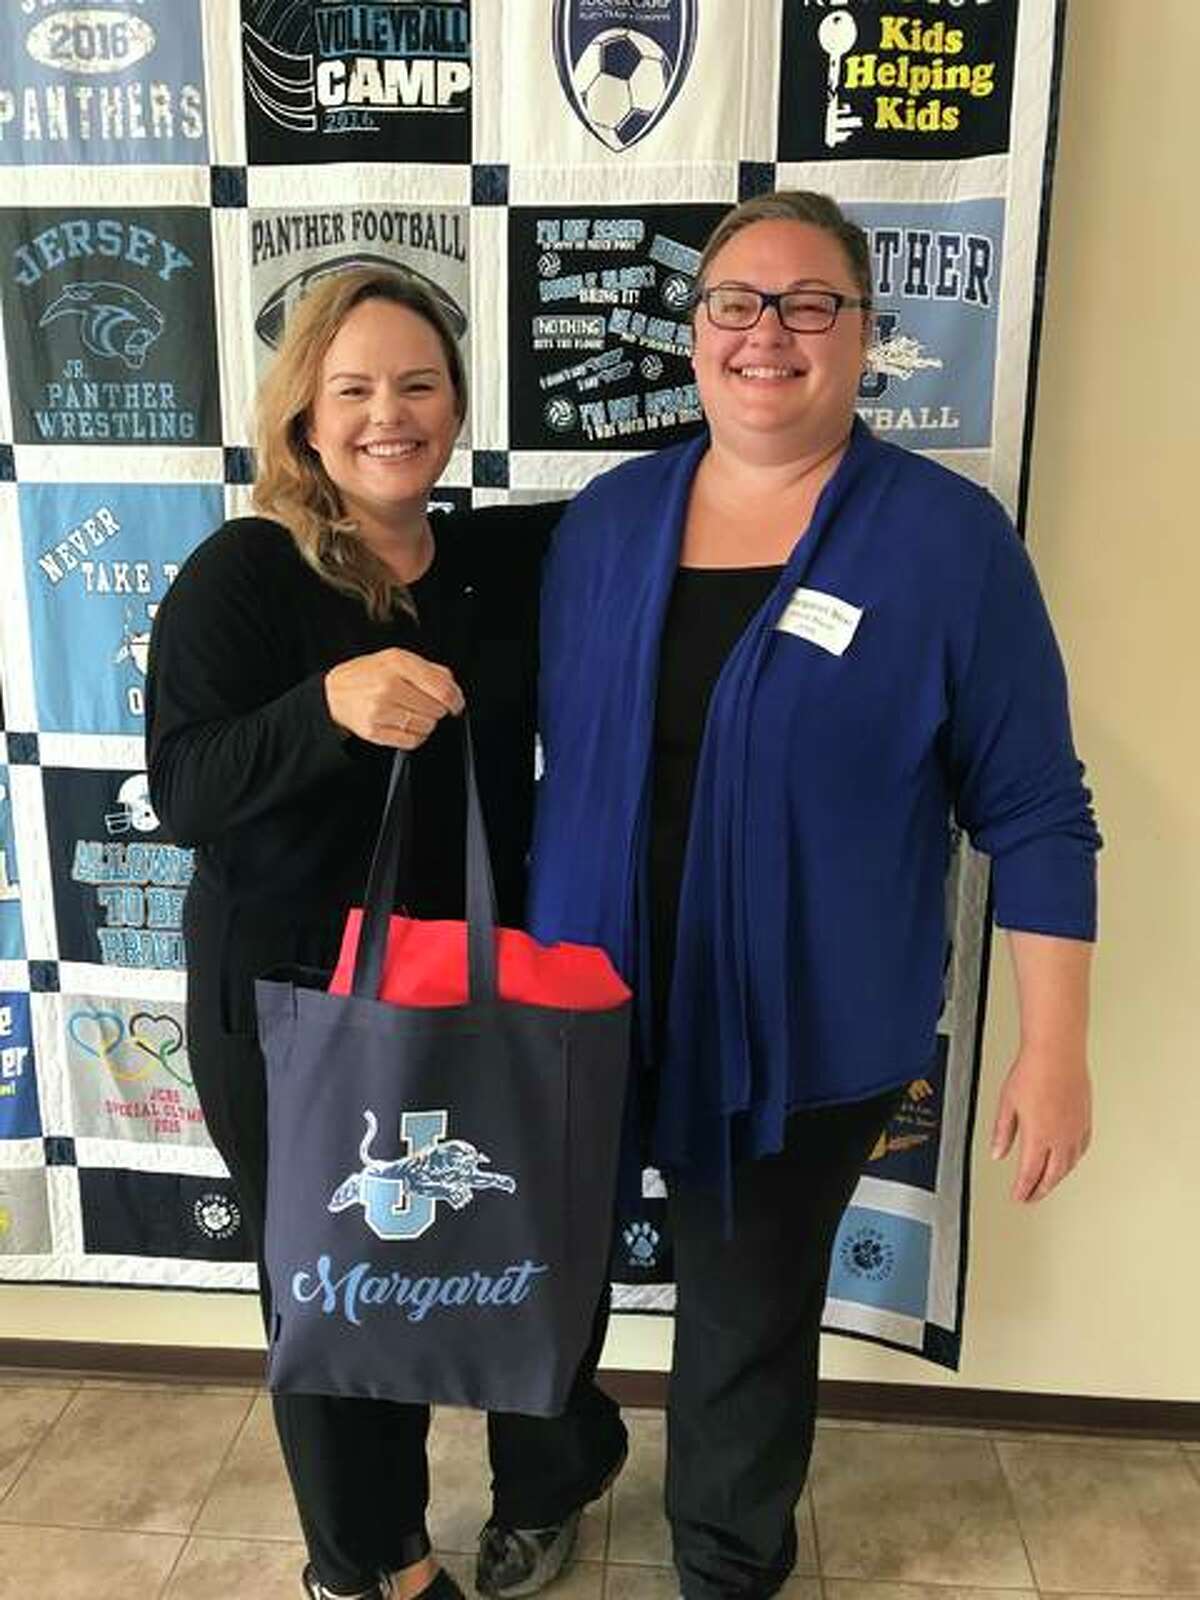 Jersey County Business Association Director Beth Bear presents a “Welcome Bag” to her sister, Margaret Bear, the new choral director at Jersey Community High School. Jersey County businesses recently provided the bags to 24 new teachers.